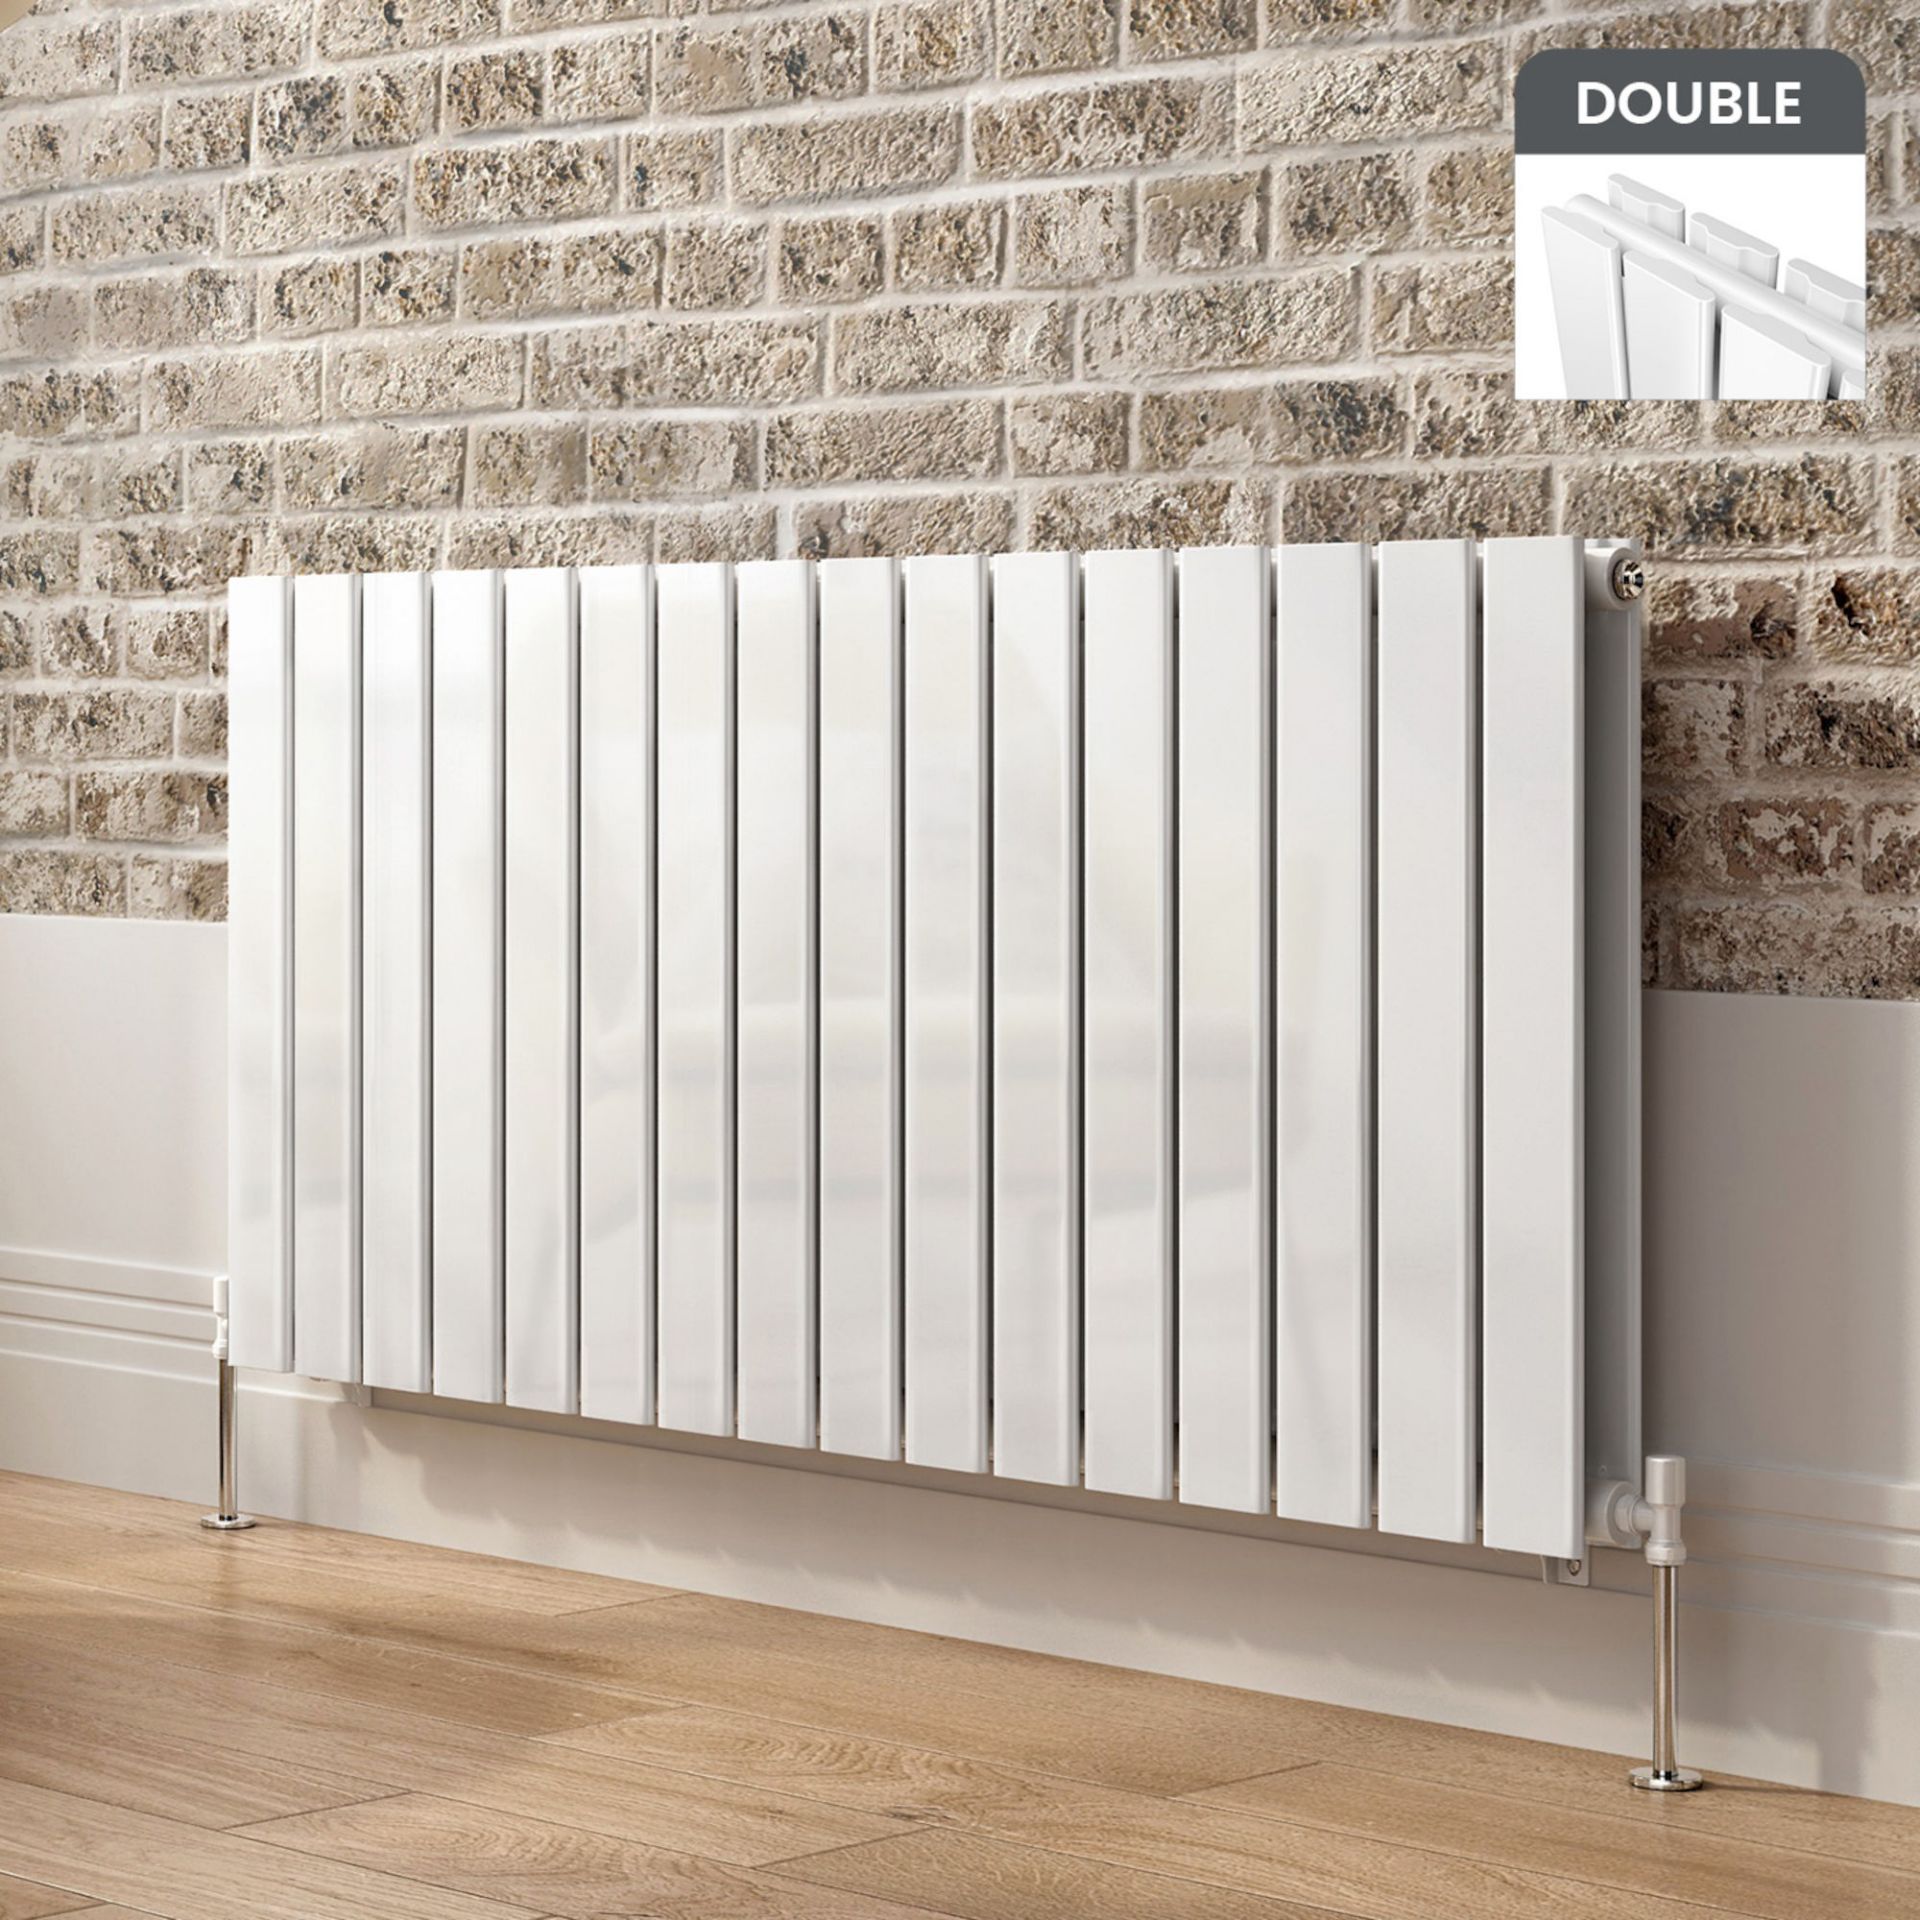 635x1020mm Gloss White Double Flat Panel Horizontal Radiator. RRP £694.99. Made with high qual...